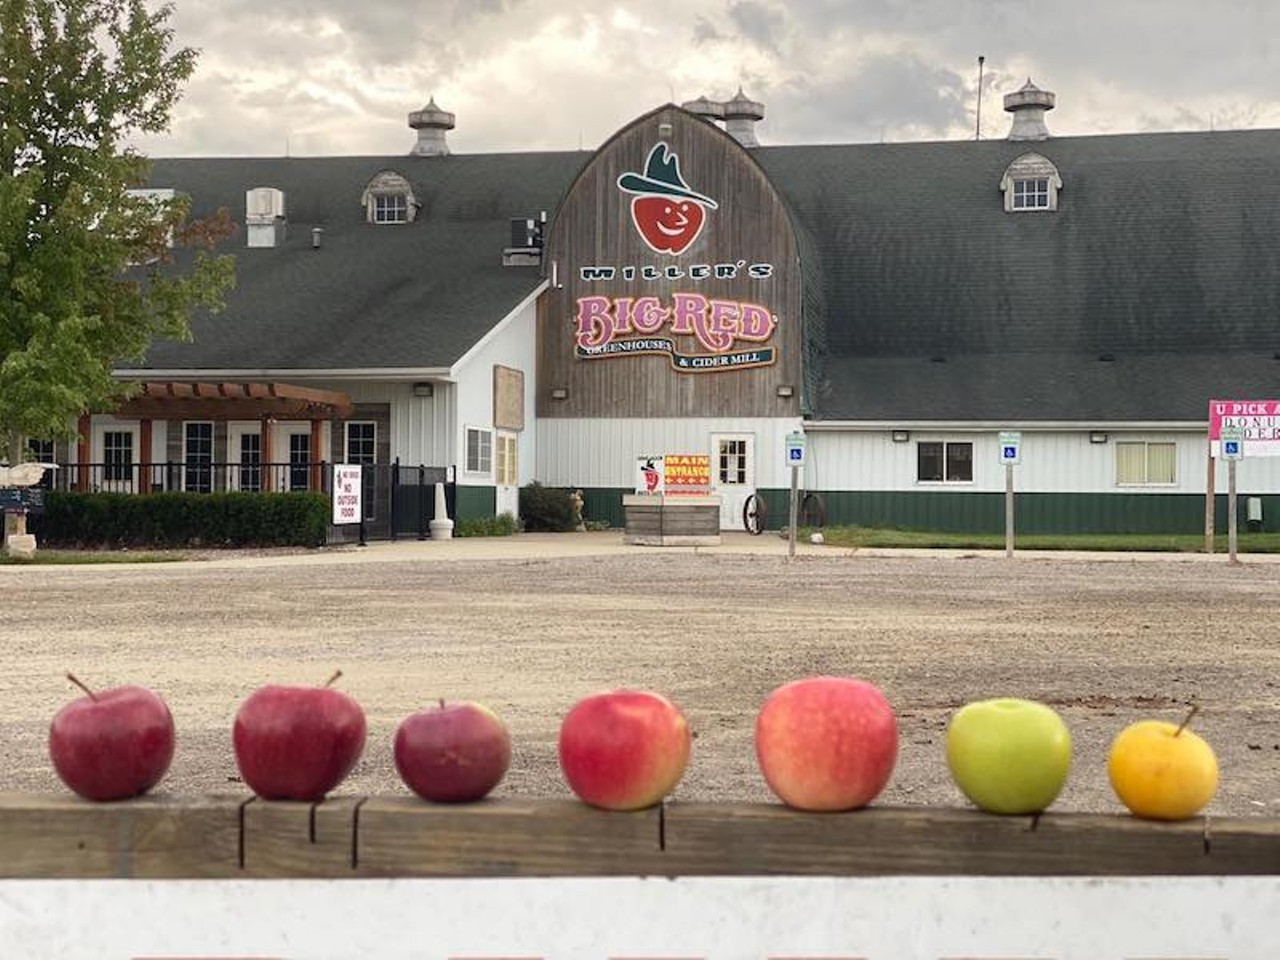 Big Red Apple Orchard
4900 W. 32 Mile Rd., Washington Twp.; 586-752-7888; facebook.com/bigredorchard  
It's still Big Red! Was that a Bring it On! reference? Sure, but it's the attitude to have as Big Red Apple Orchard brings wagon rides, cornhole, a petting zoo and, of course, apple and pumpkin picking to Michigan's fall.